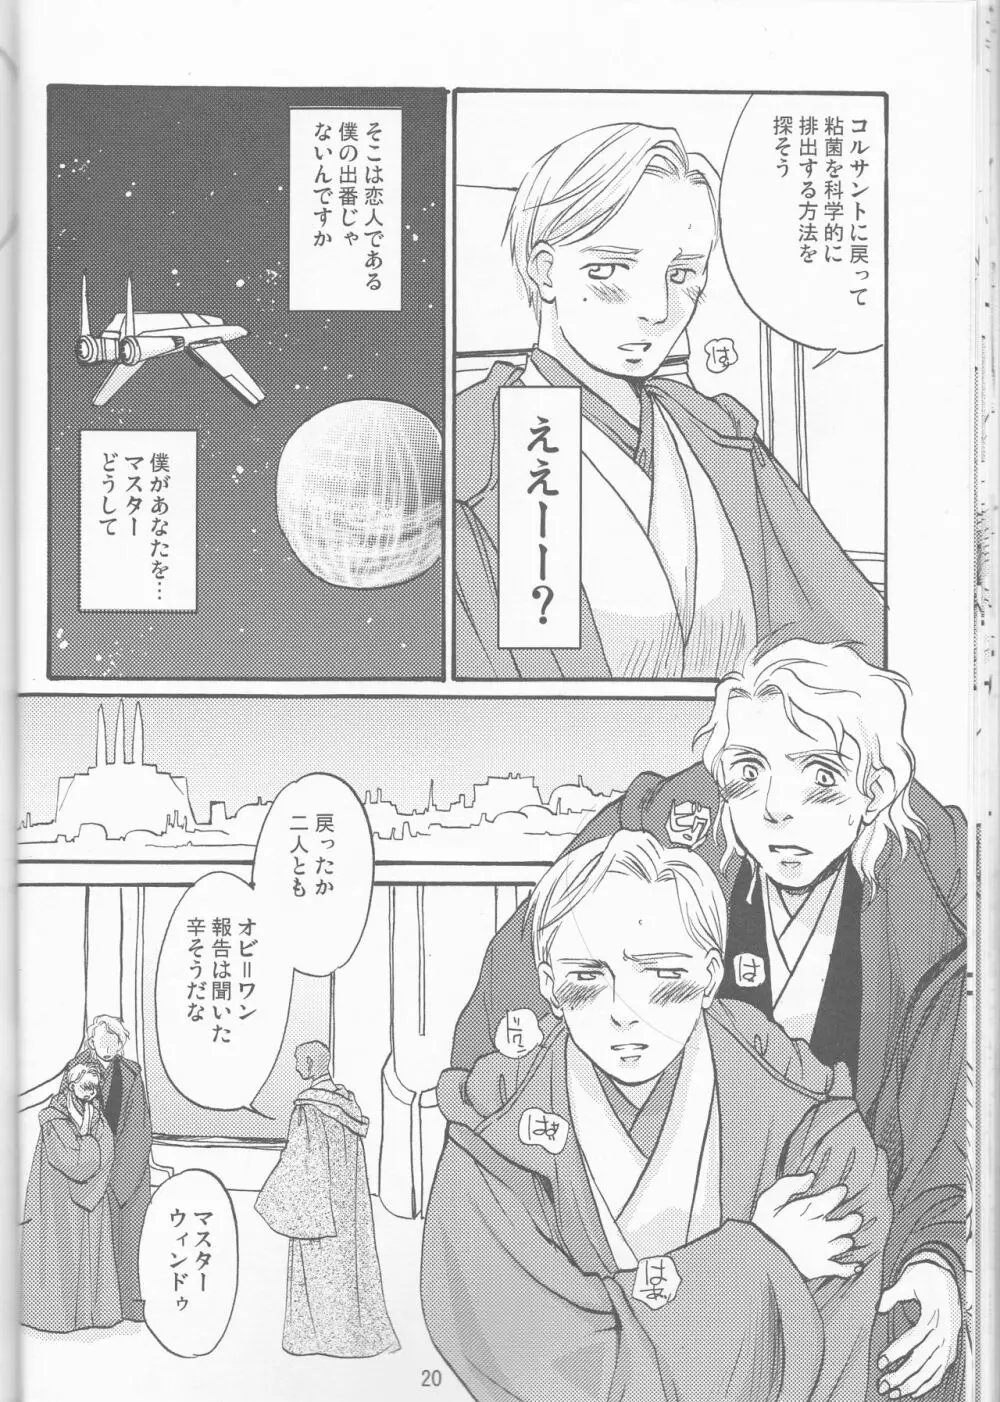 Obi Female Transformation Book 1 of 2 - page20